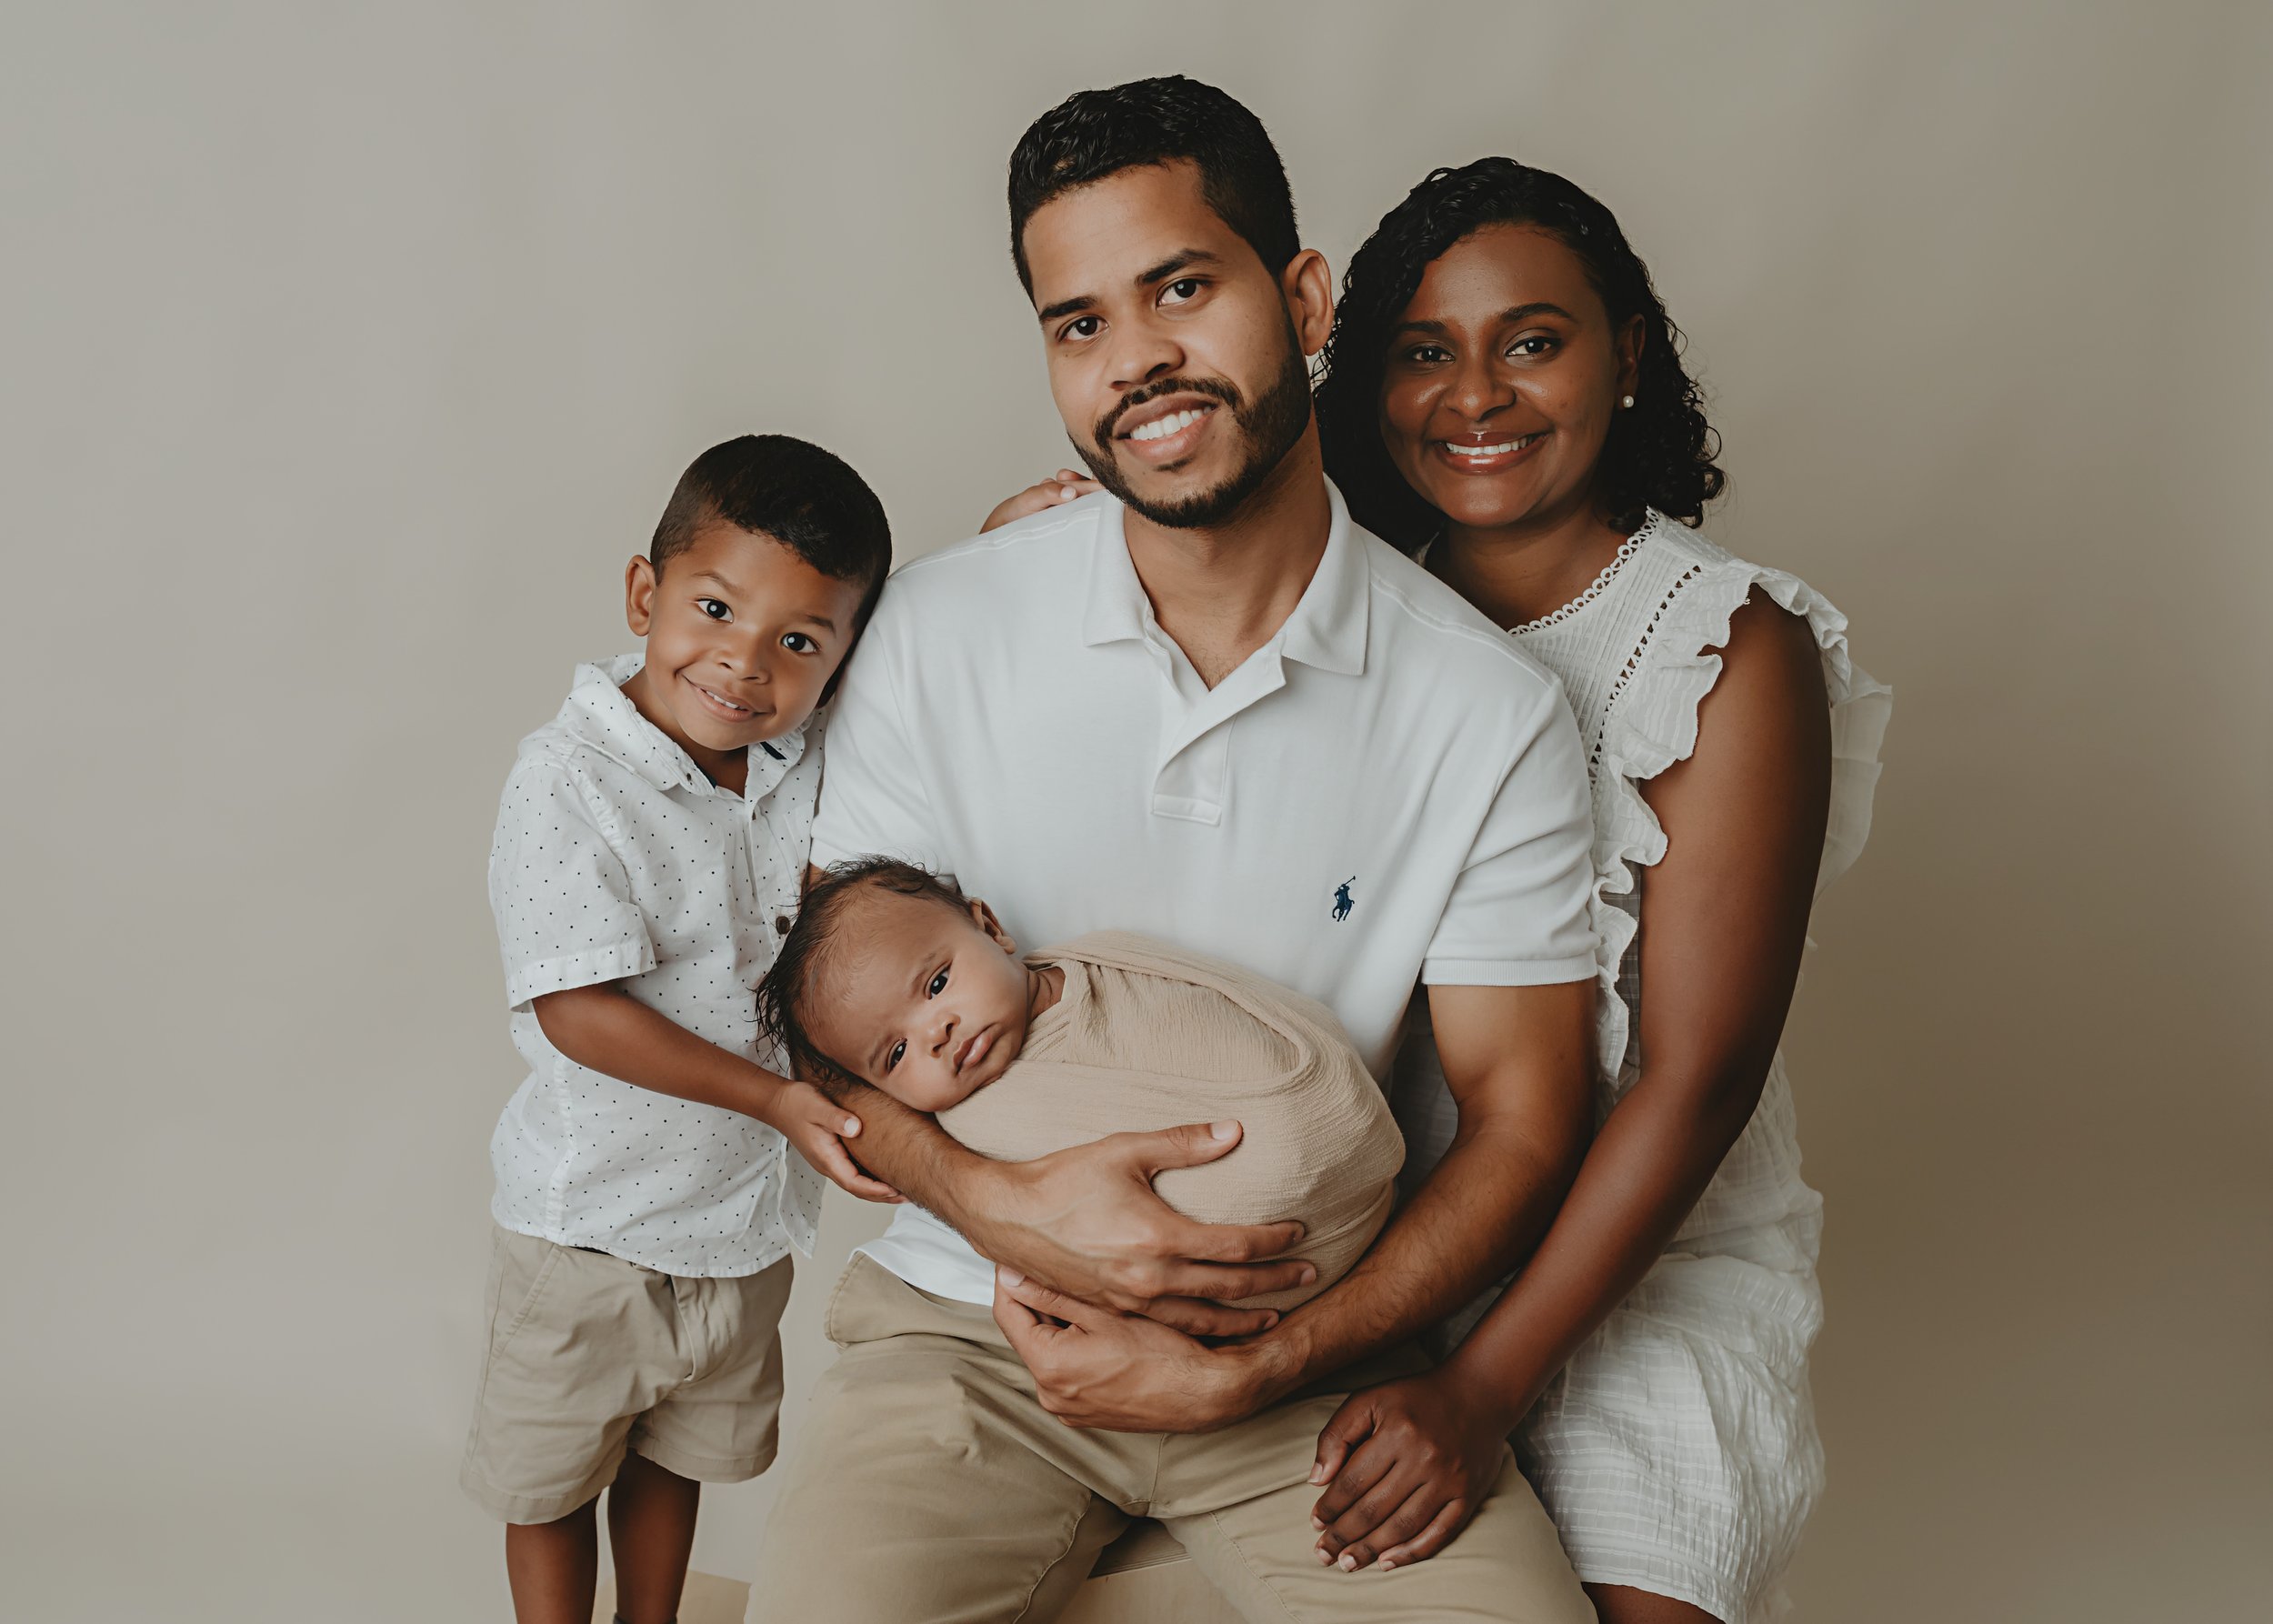 fort lauderdale family photo with newborn and sibling